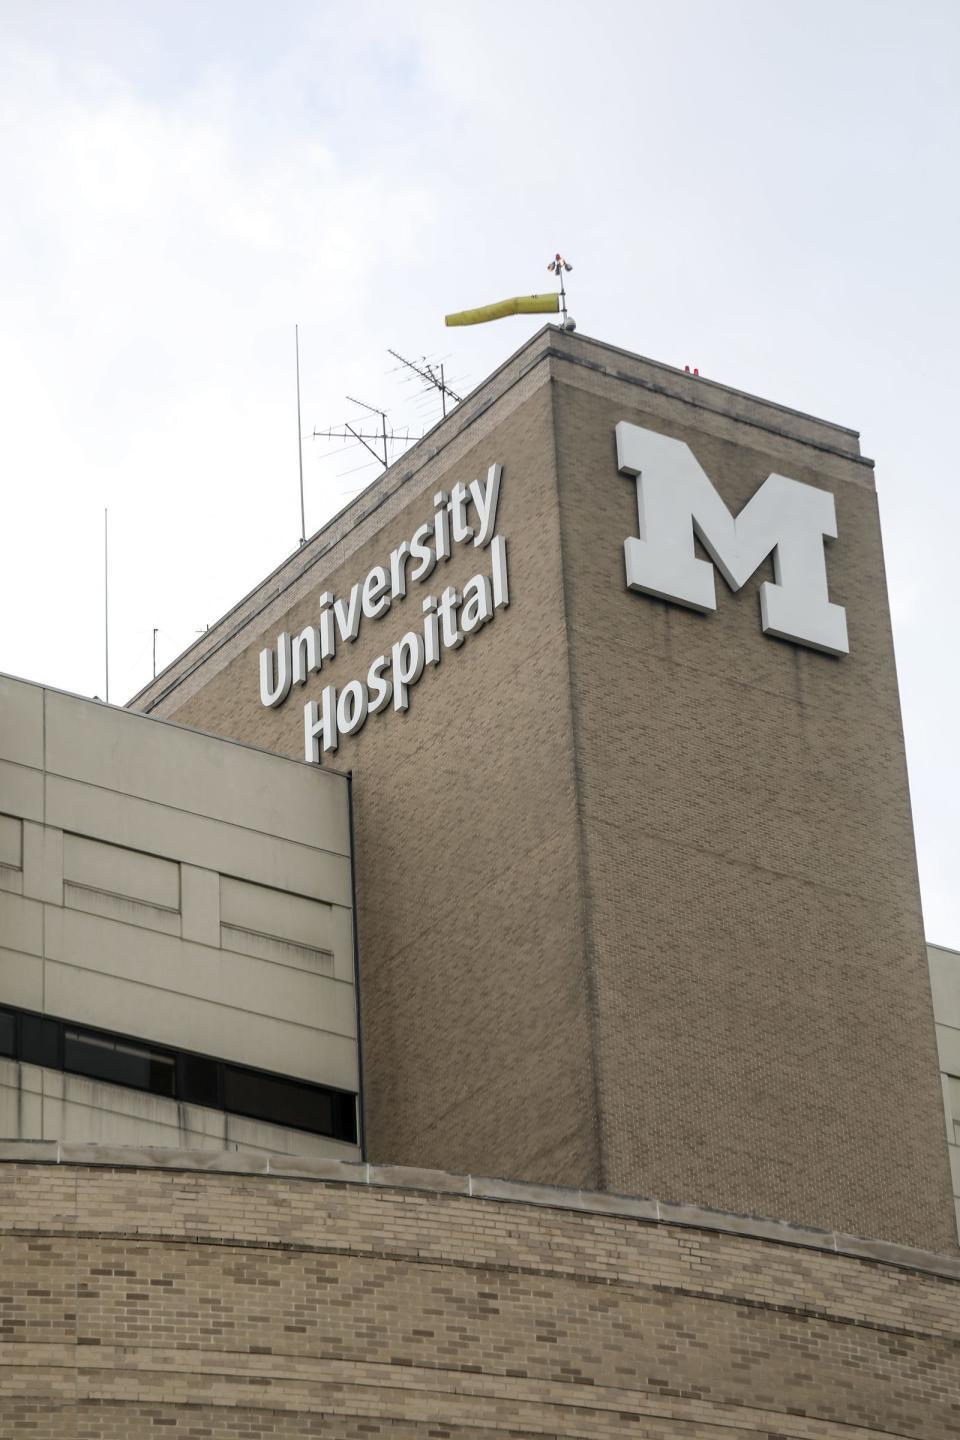 The University of Michigan Hospital system on the University of Michigan central campus in Ann Arbor, Mich., photographed on Wed., June 13, 2018.